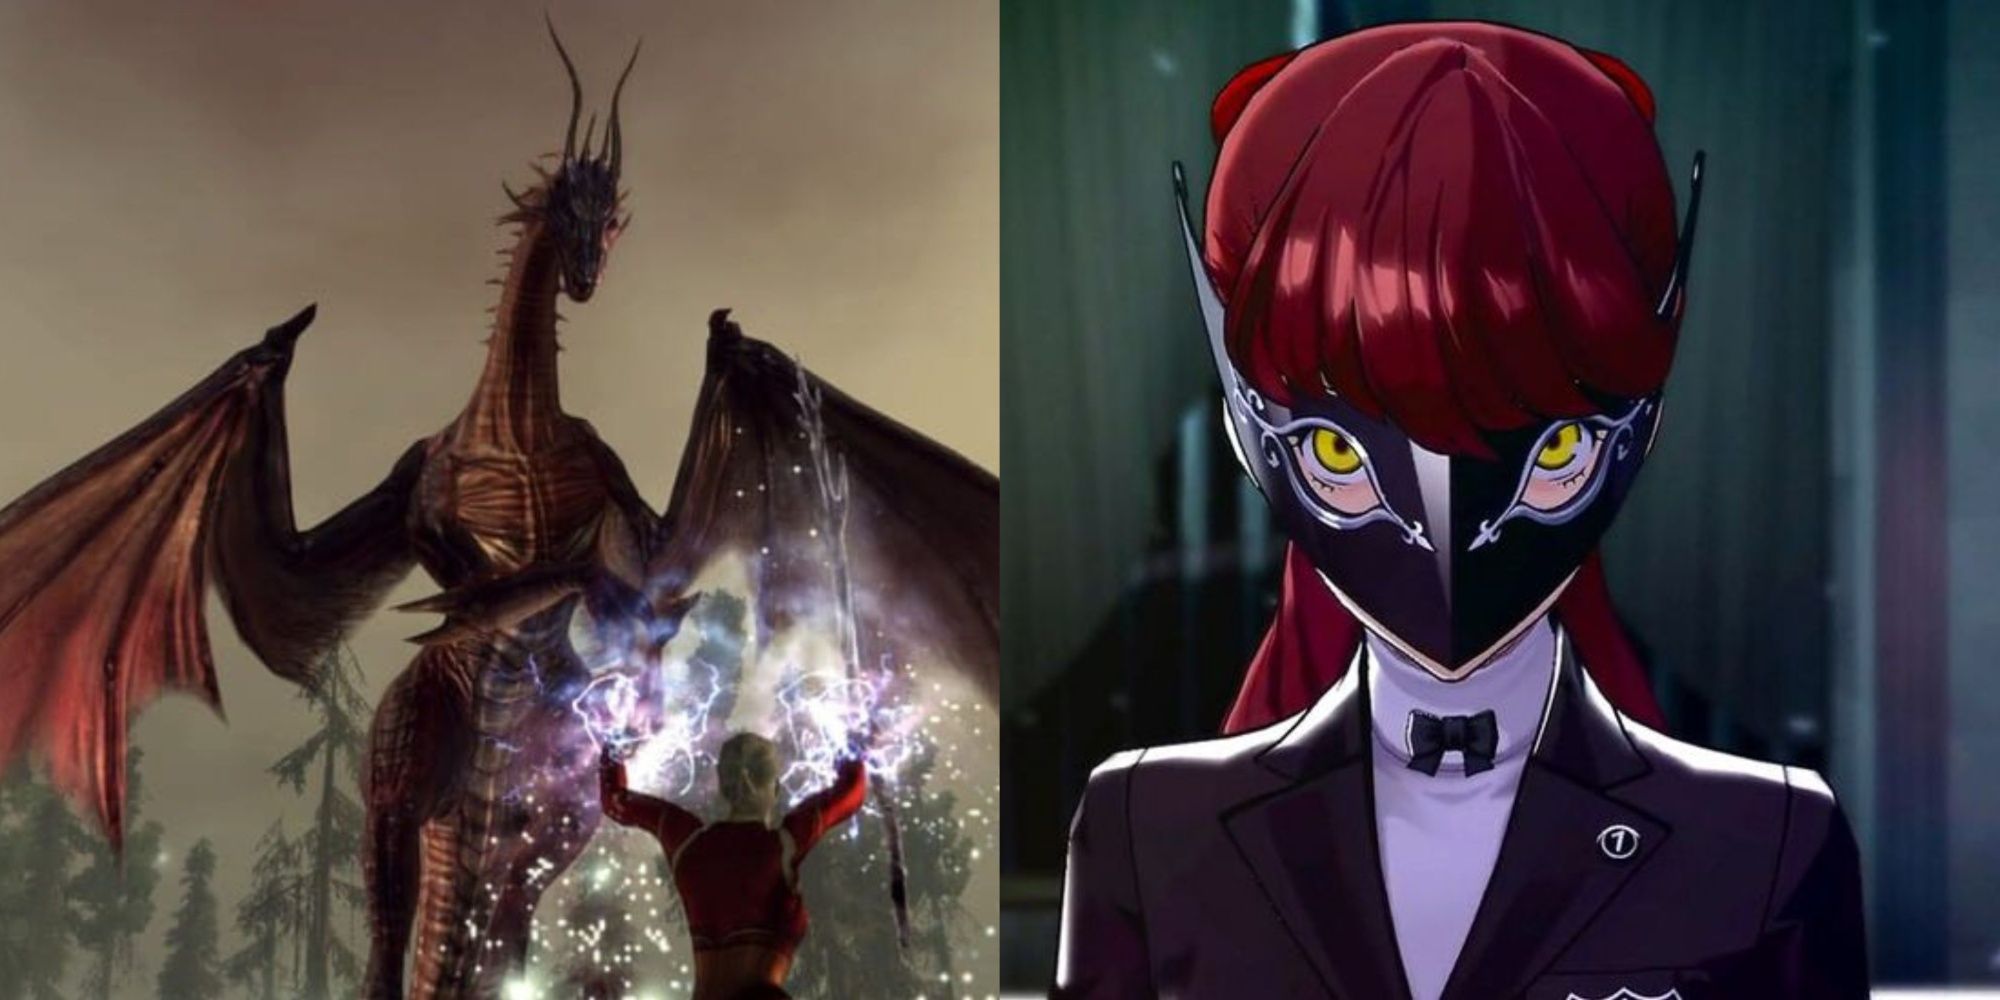 Game Pass RPGs Featured Split Image Dragon Age Origins And Persona 5